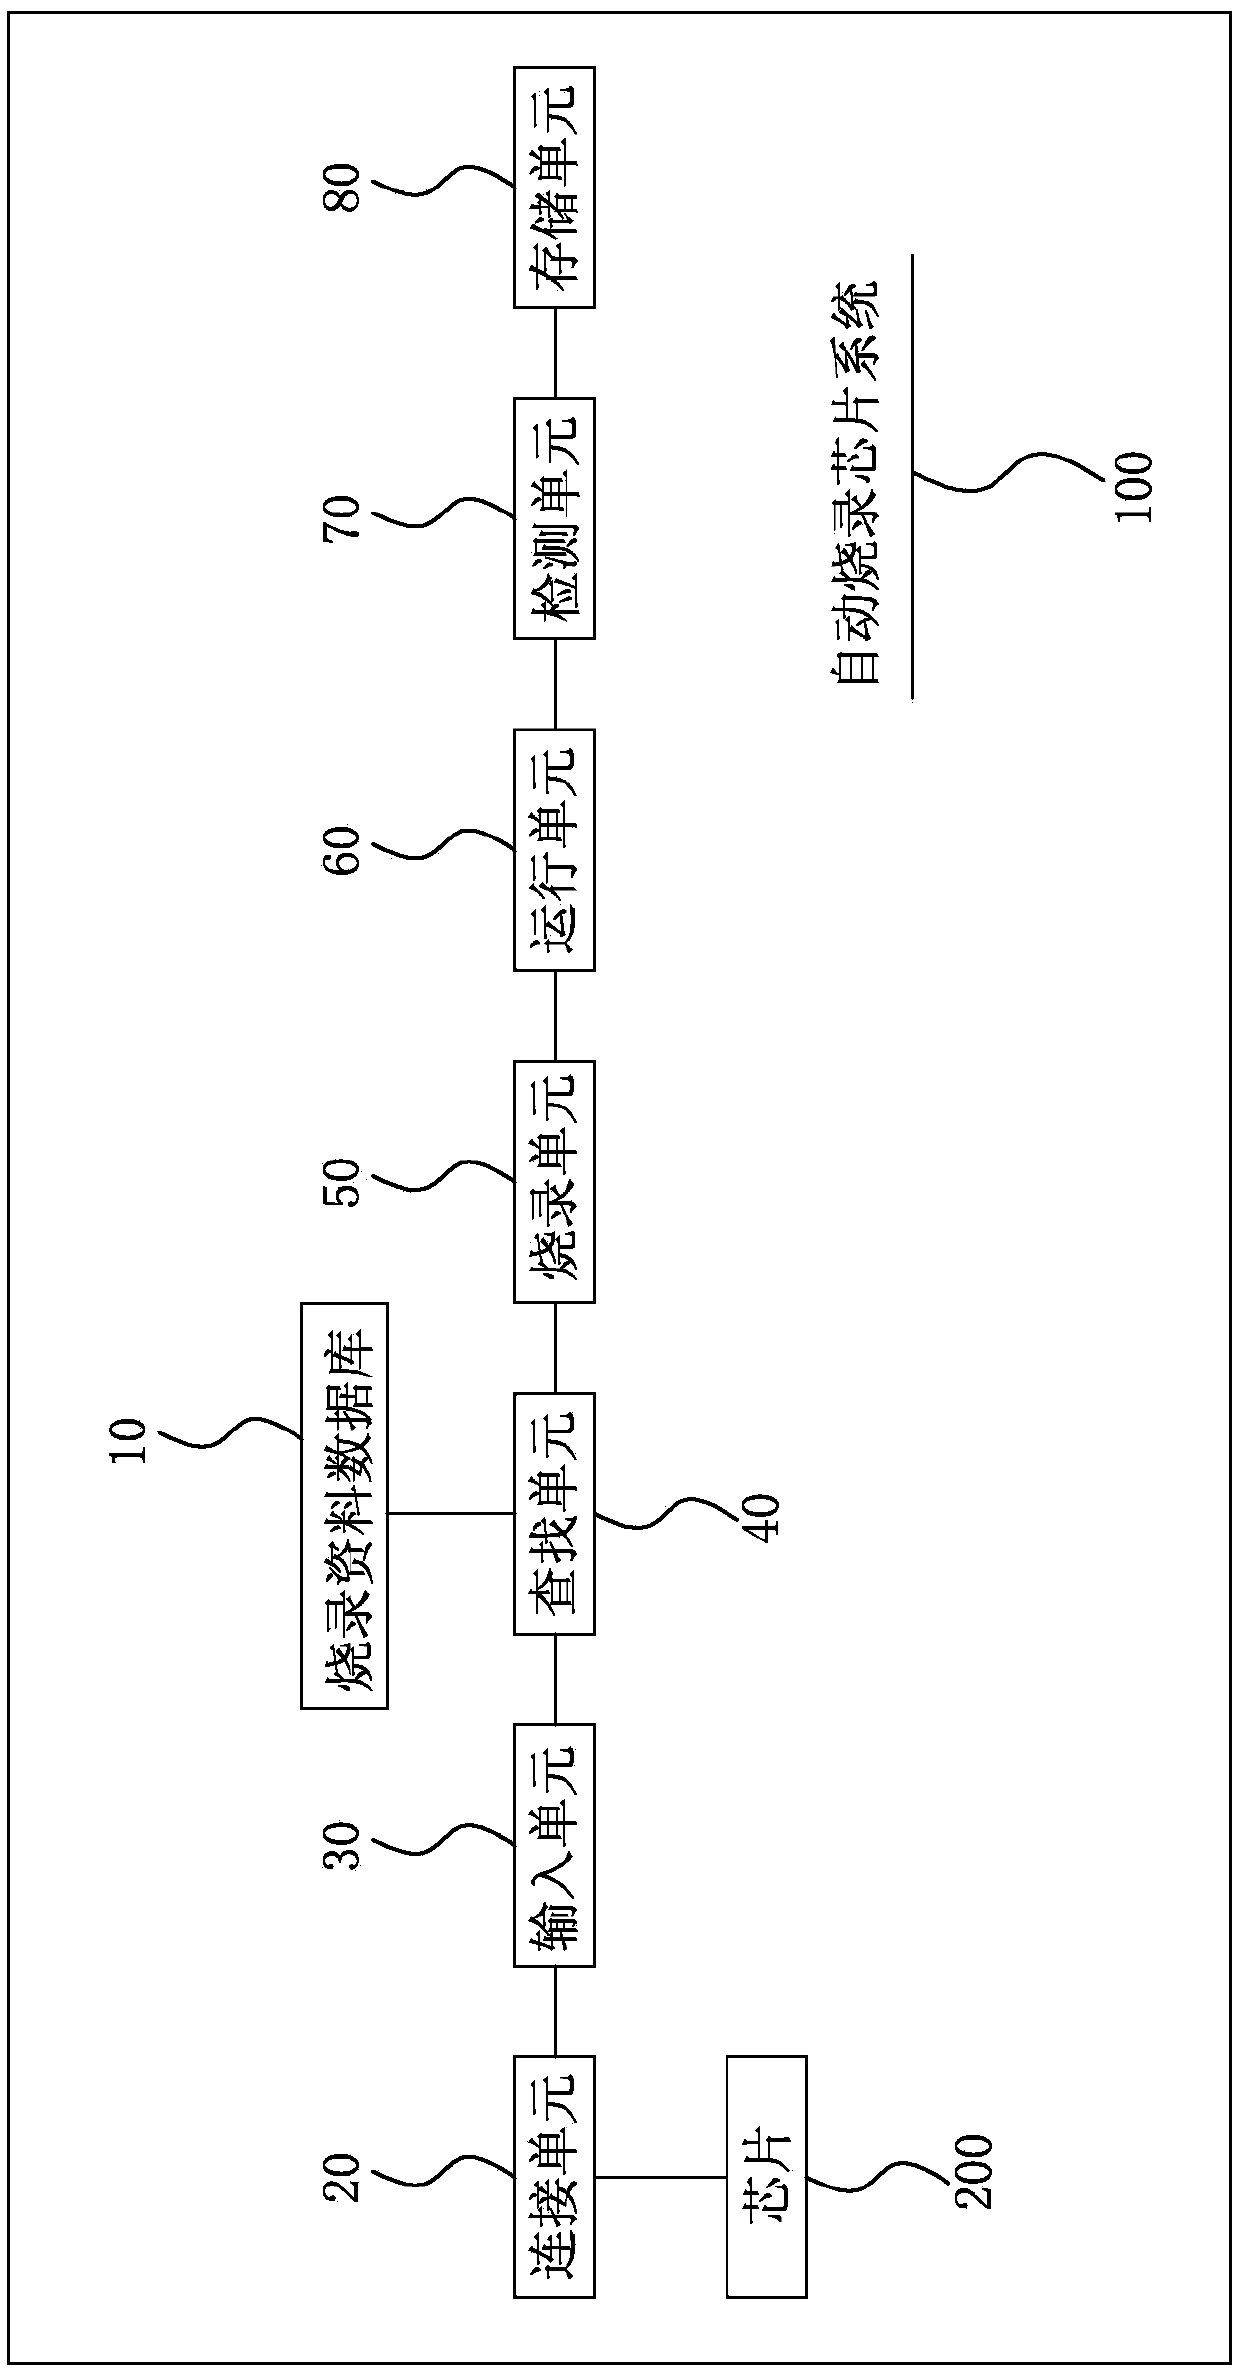 Automatic chip burning system and method